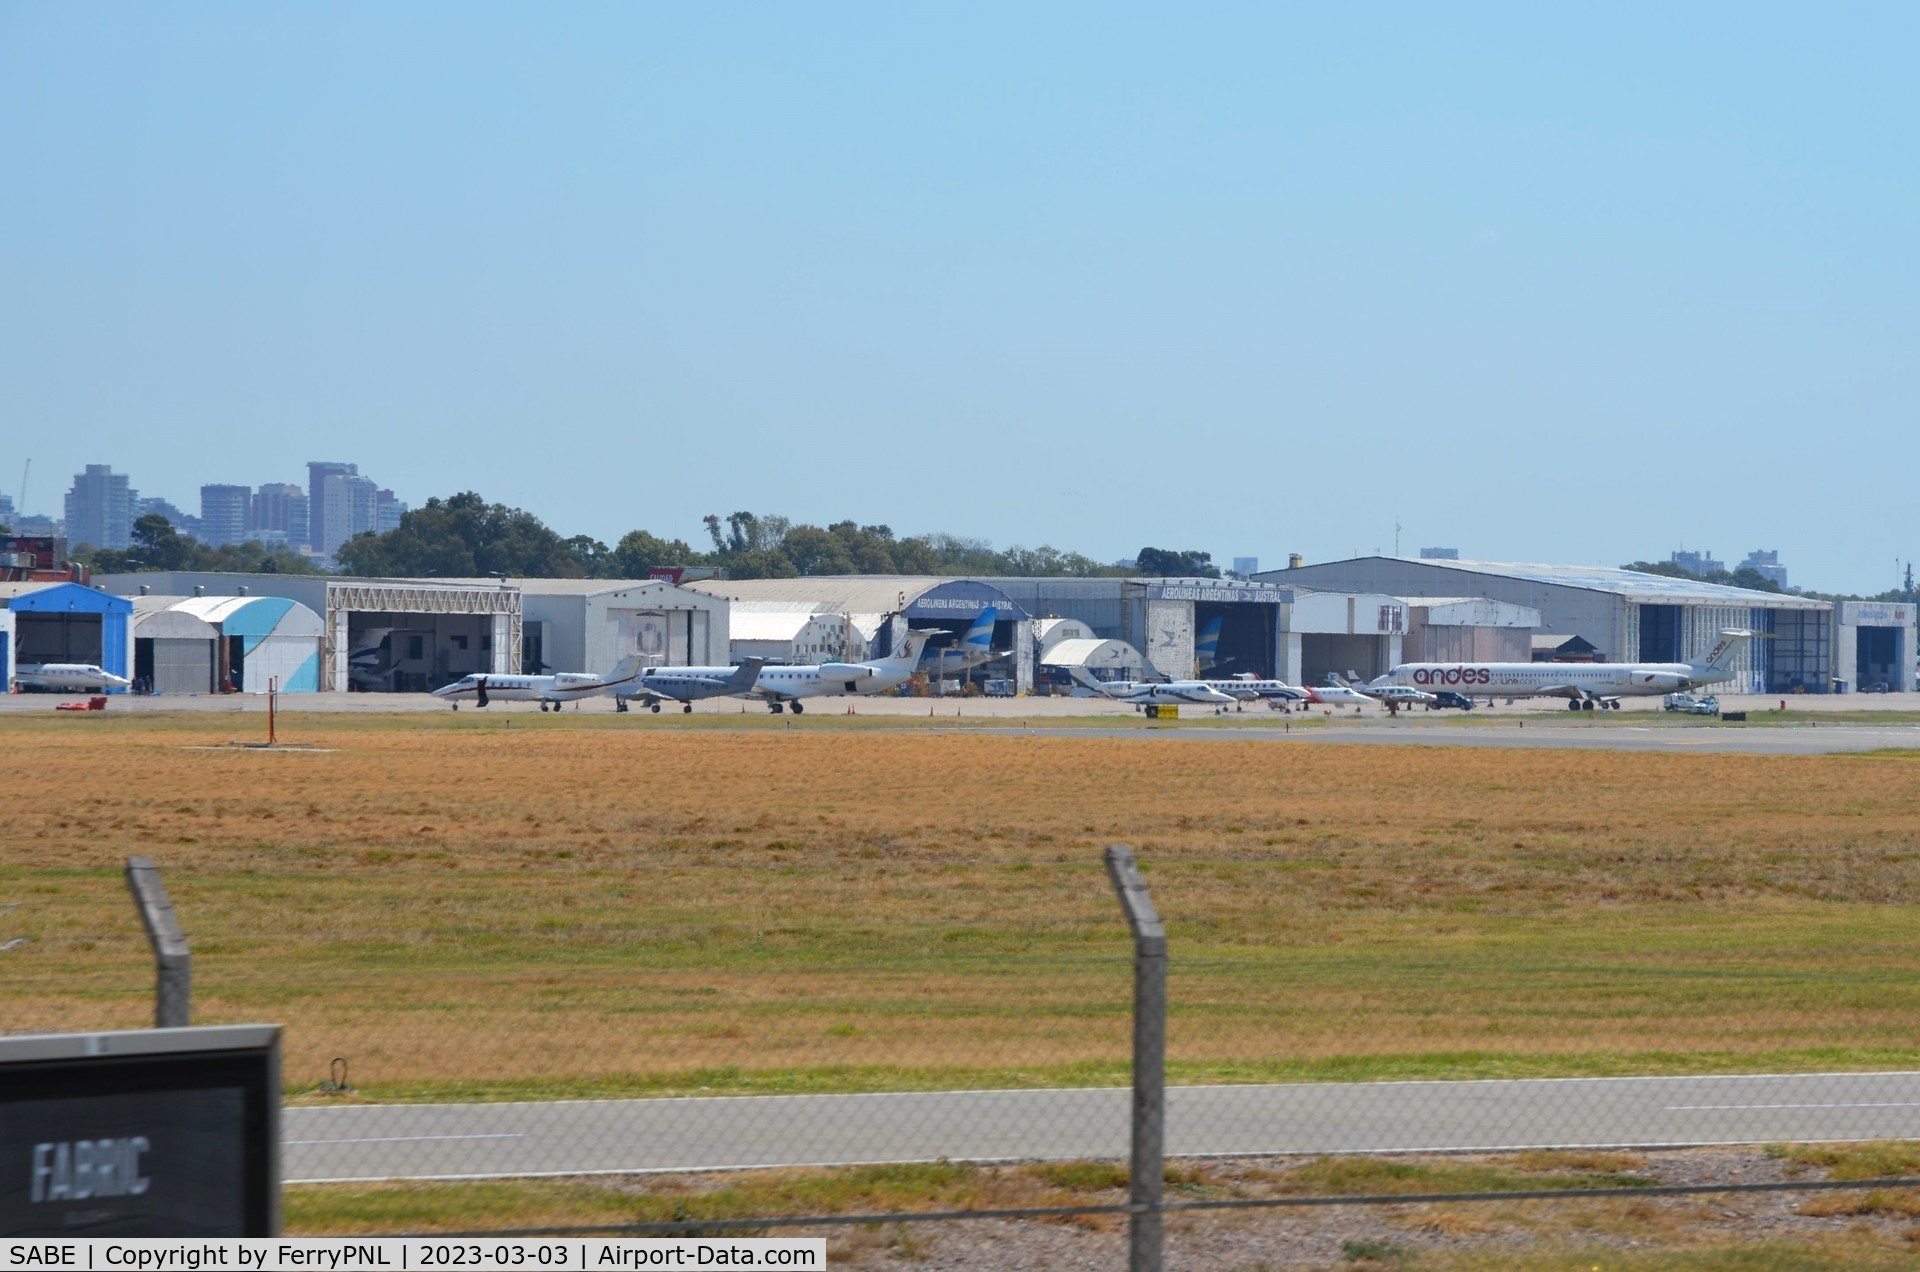 Jorge Newbery Airport, Buenos Aires Argentina (SABE) - View over AEP towards the GA/maintenance area